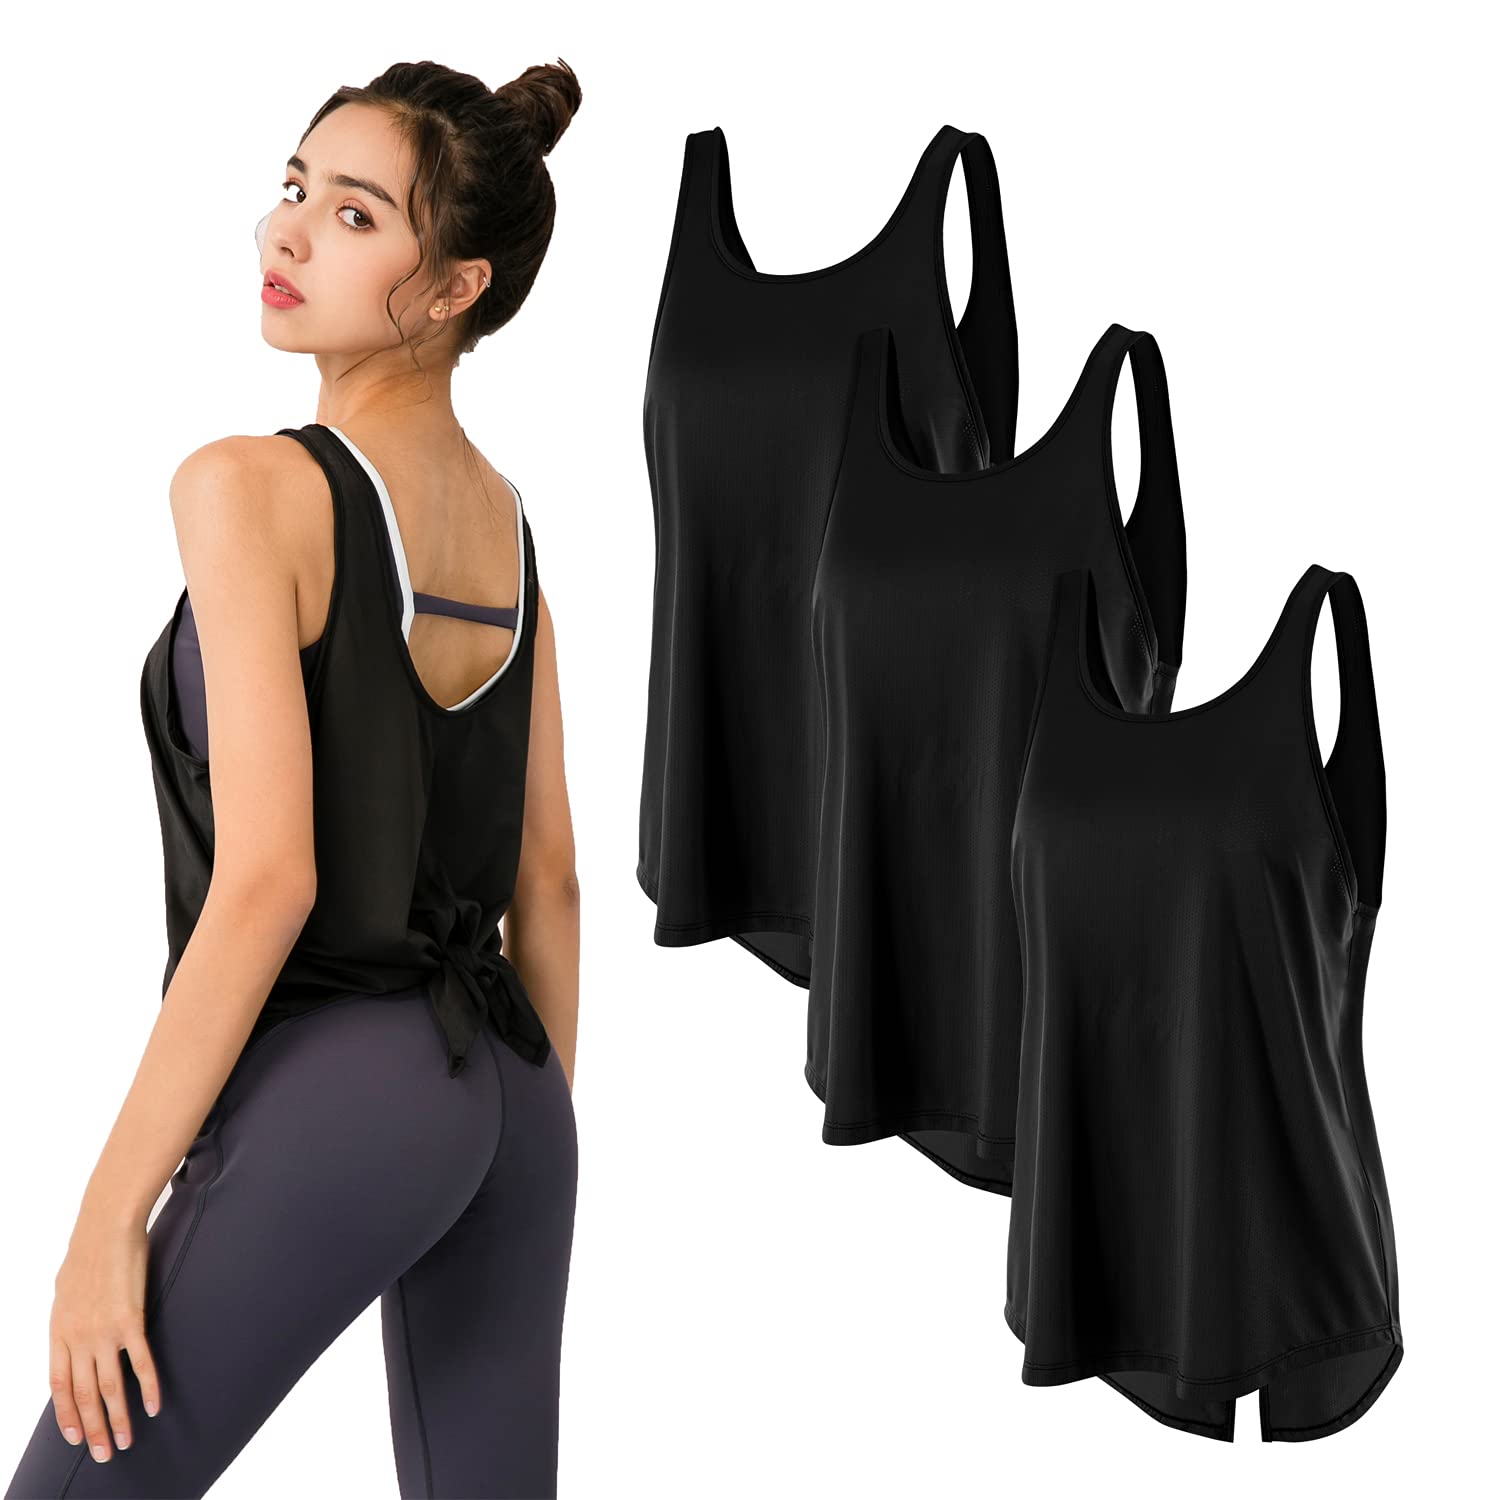 3 Pack Workout Tank Tops for Women Gym Exercise Athletic Yoga Tops Female  Sports Shirts